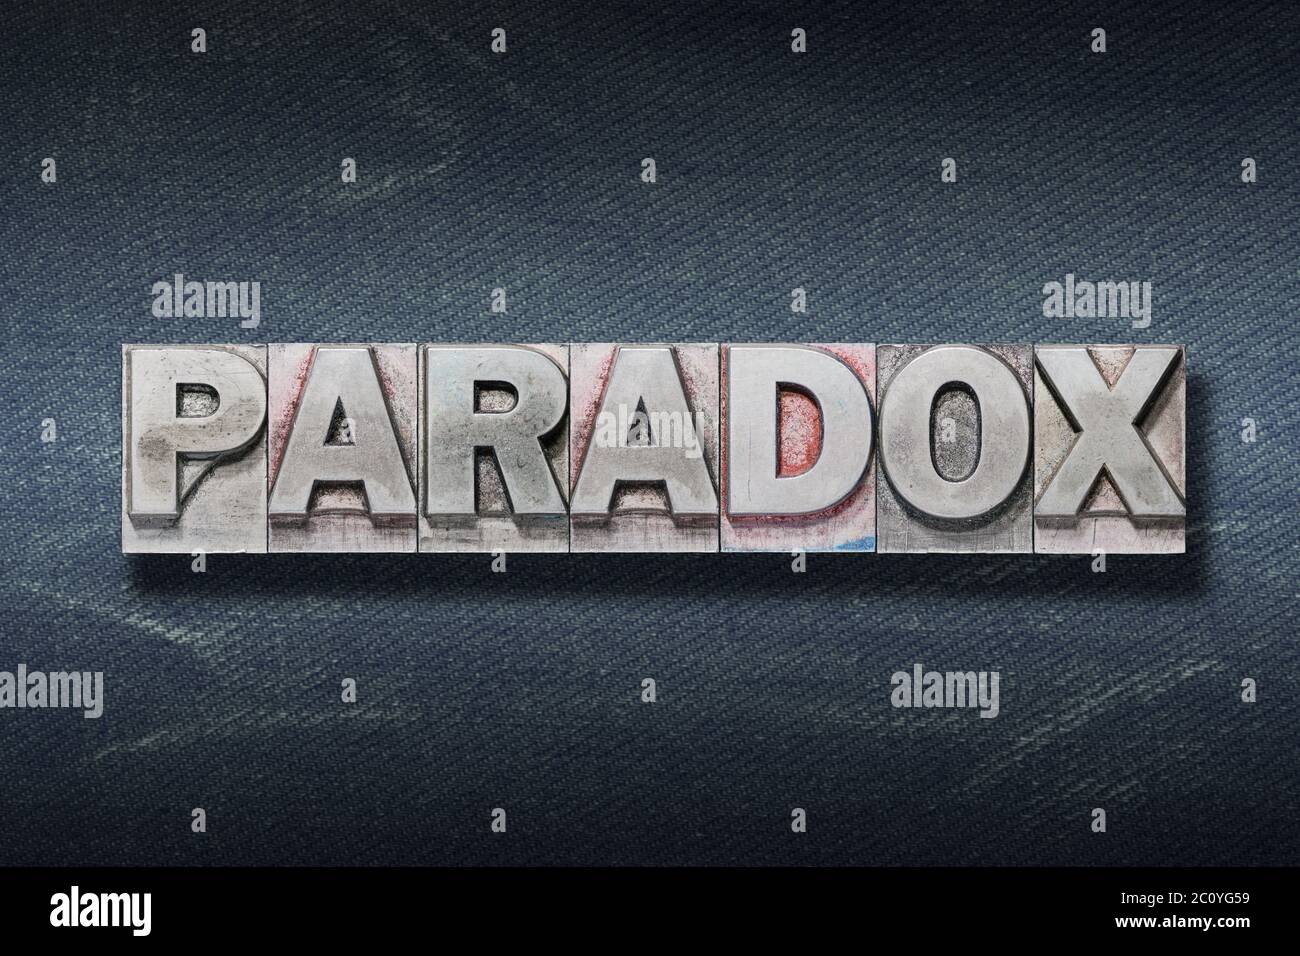 paradox word made from metallic letterpress on dark jeans background Stock Photo